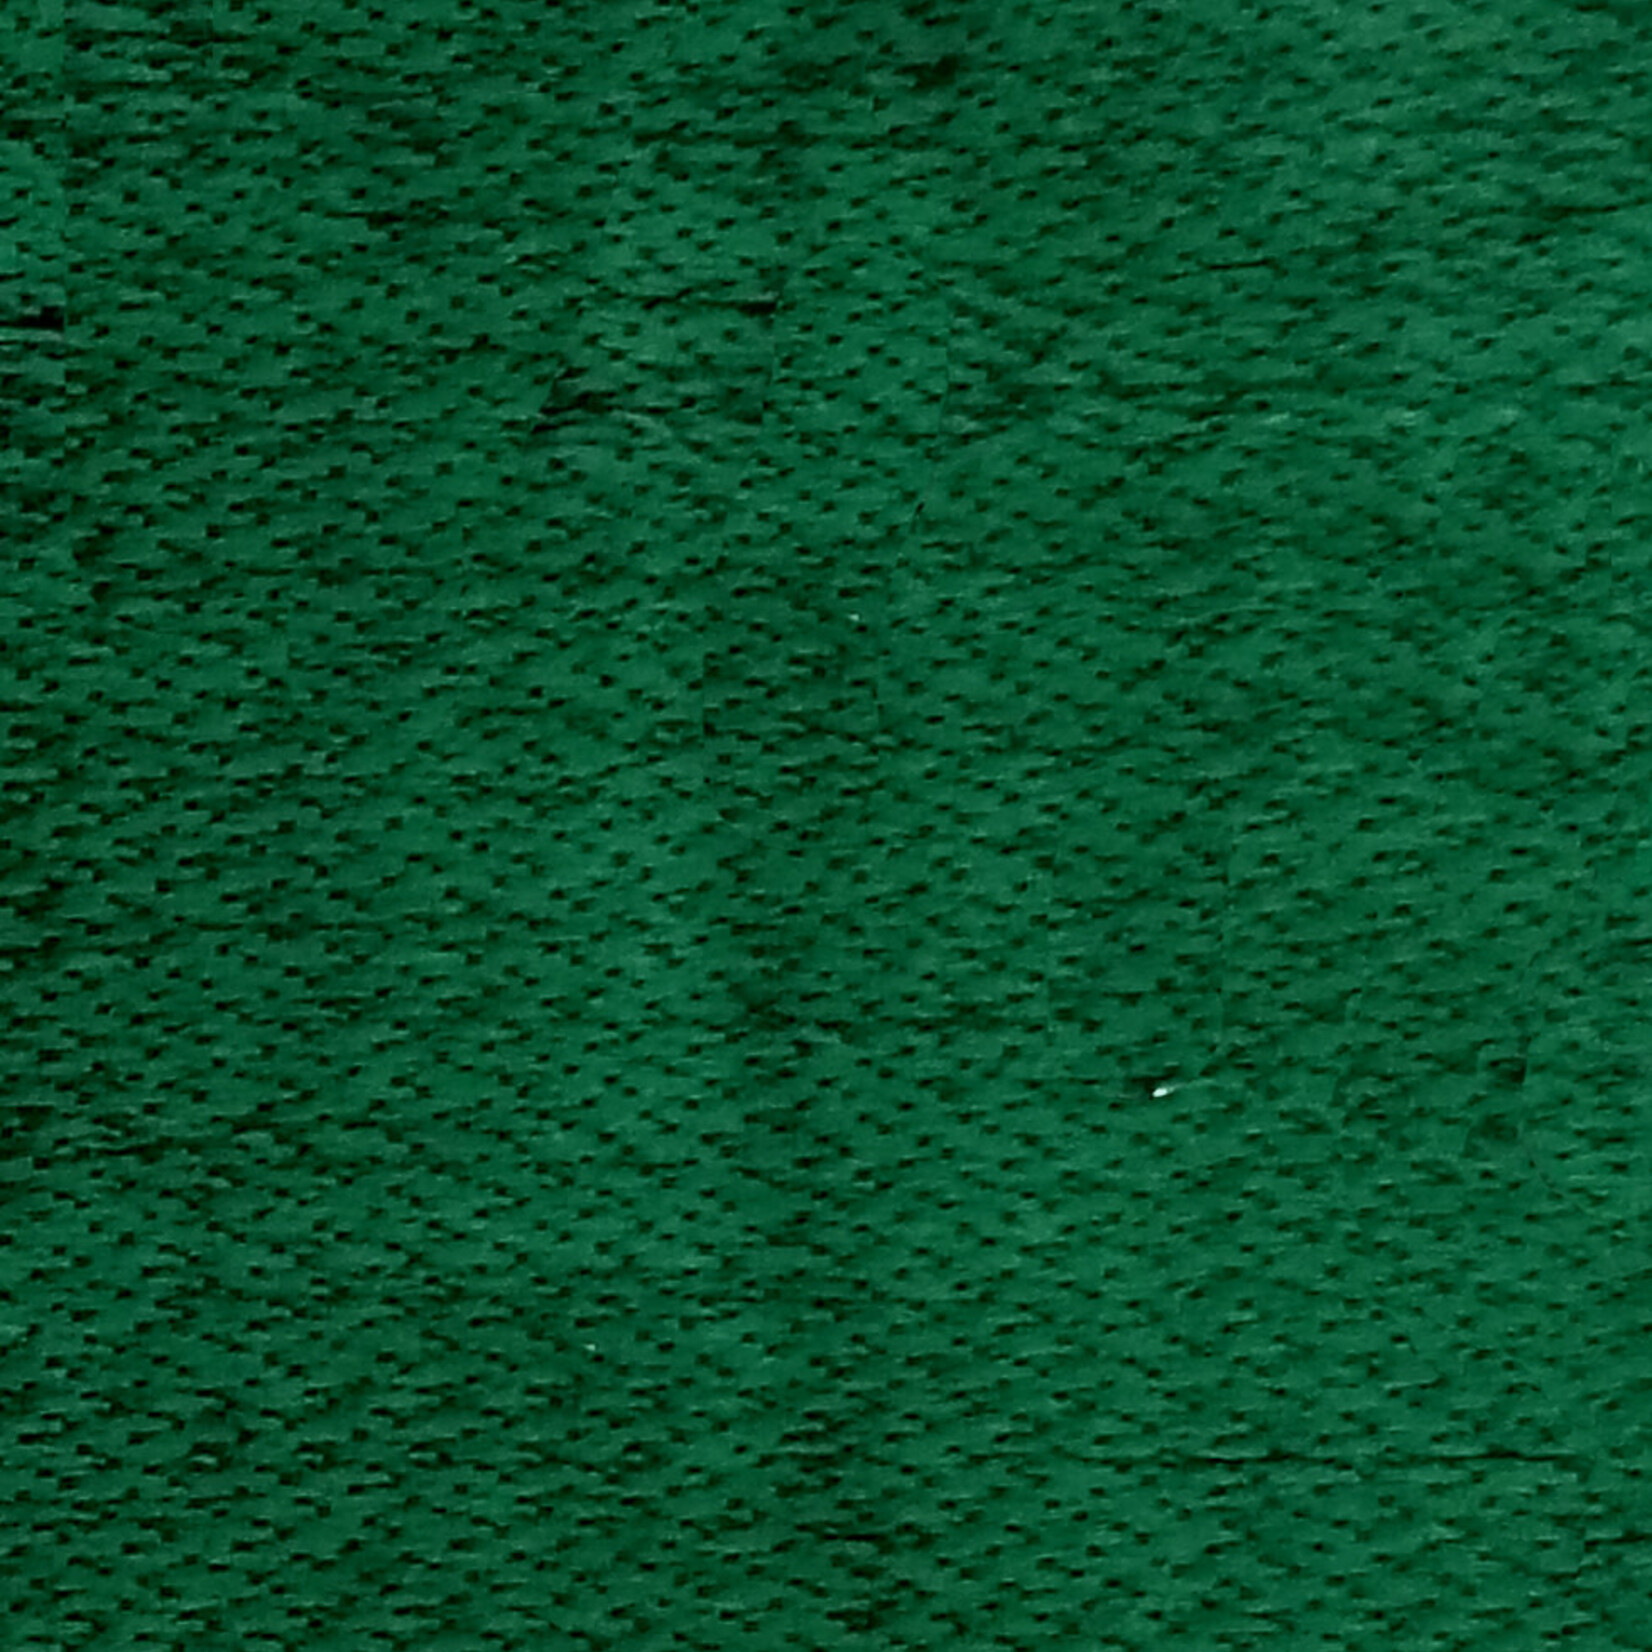 Flat Lame 44 - 45 Inches - Emerald Green